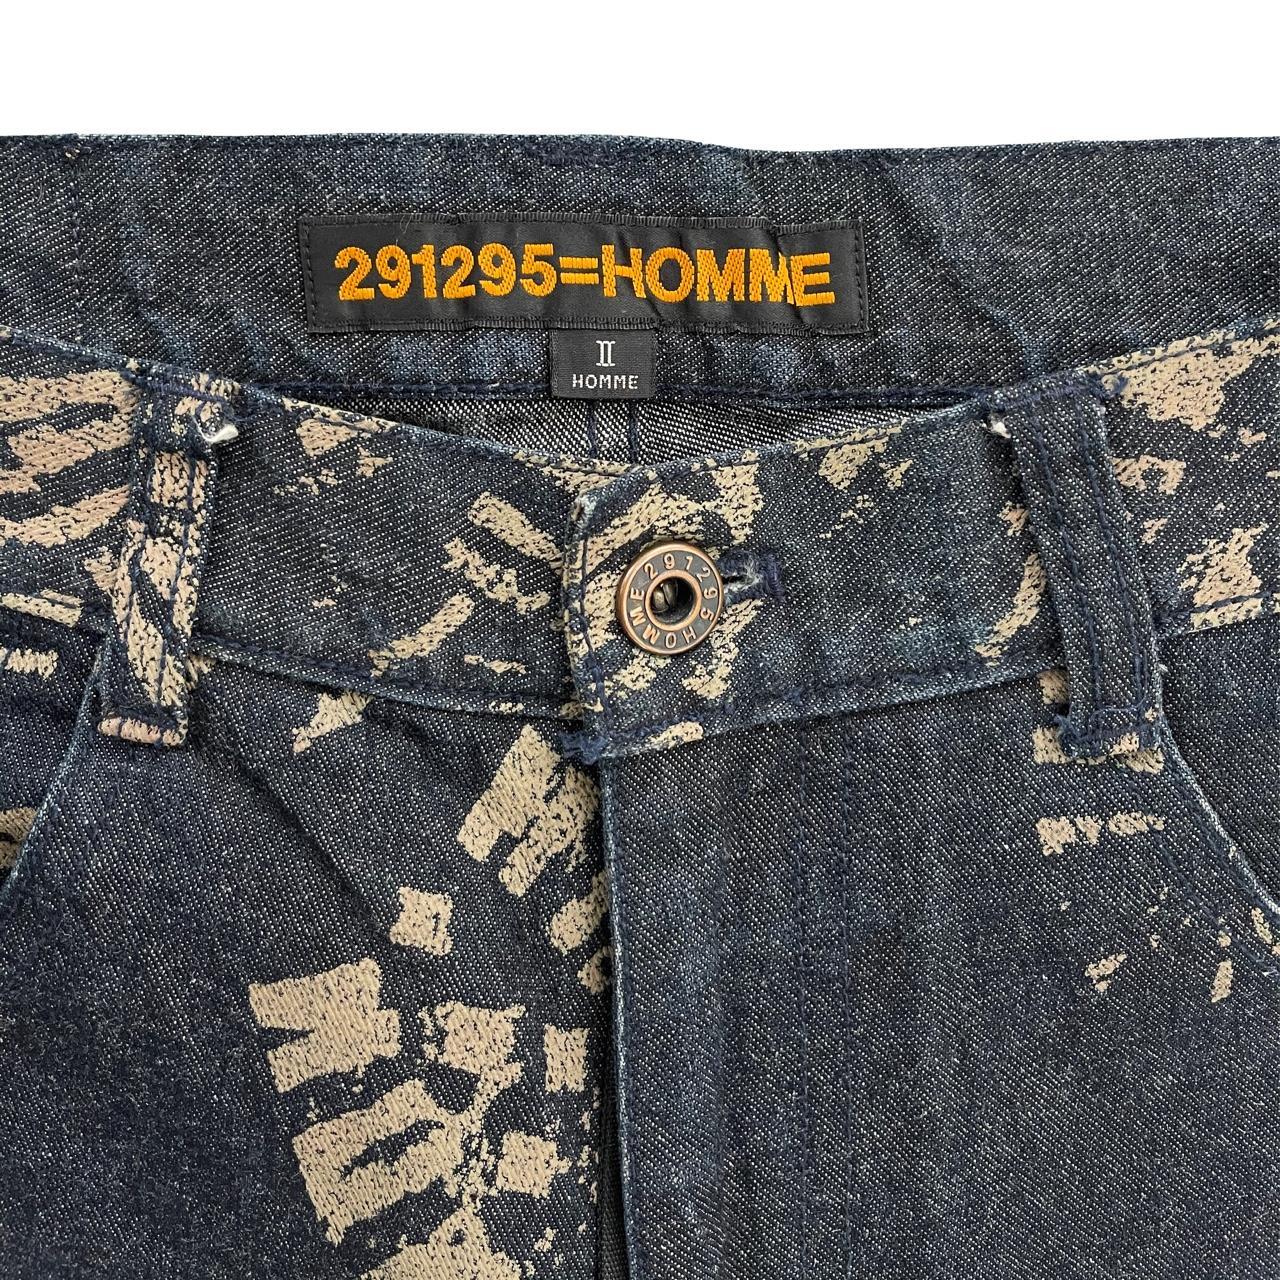 291295 = Homme Jeans – The Holy Grail